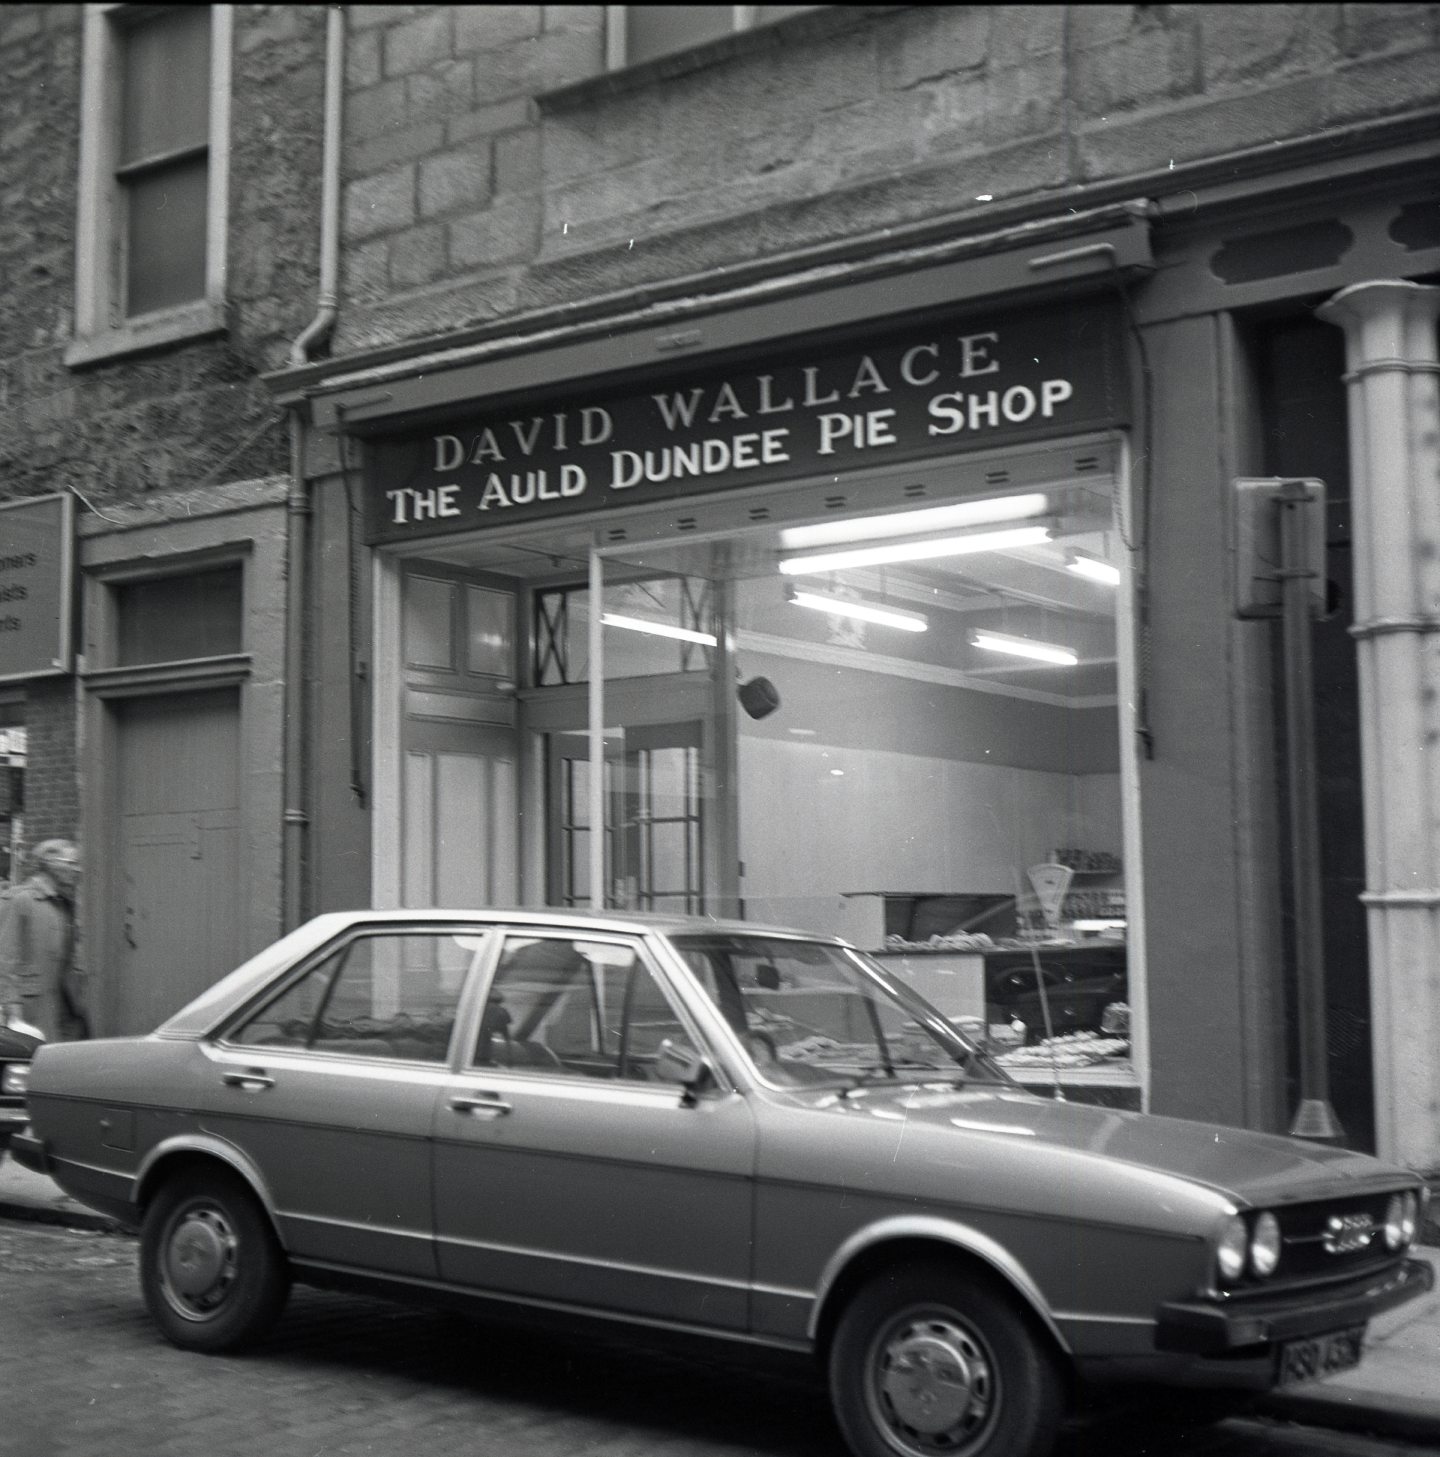 The Auld Dundee Pie shop in 1977.